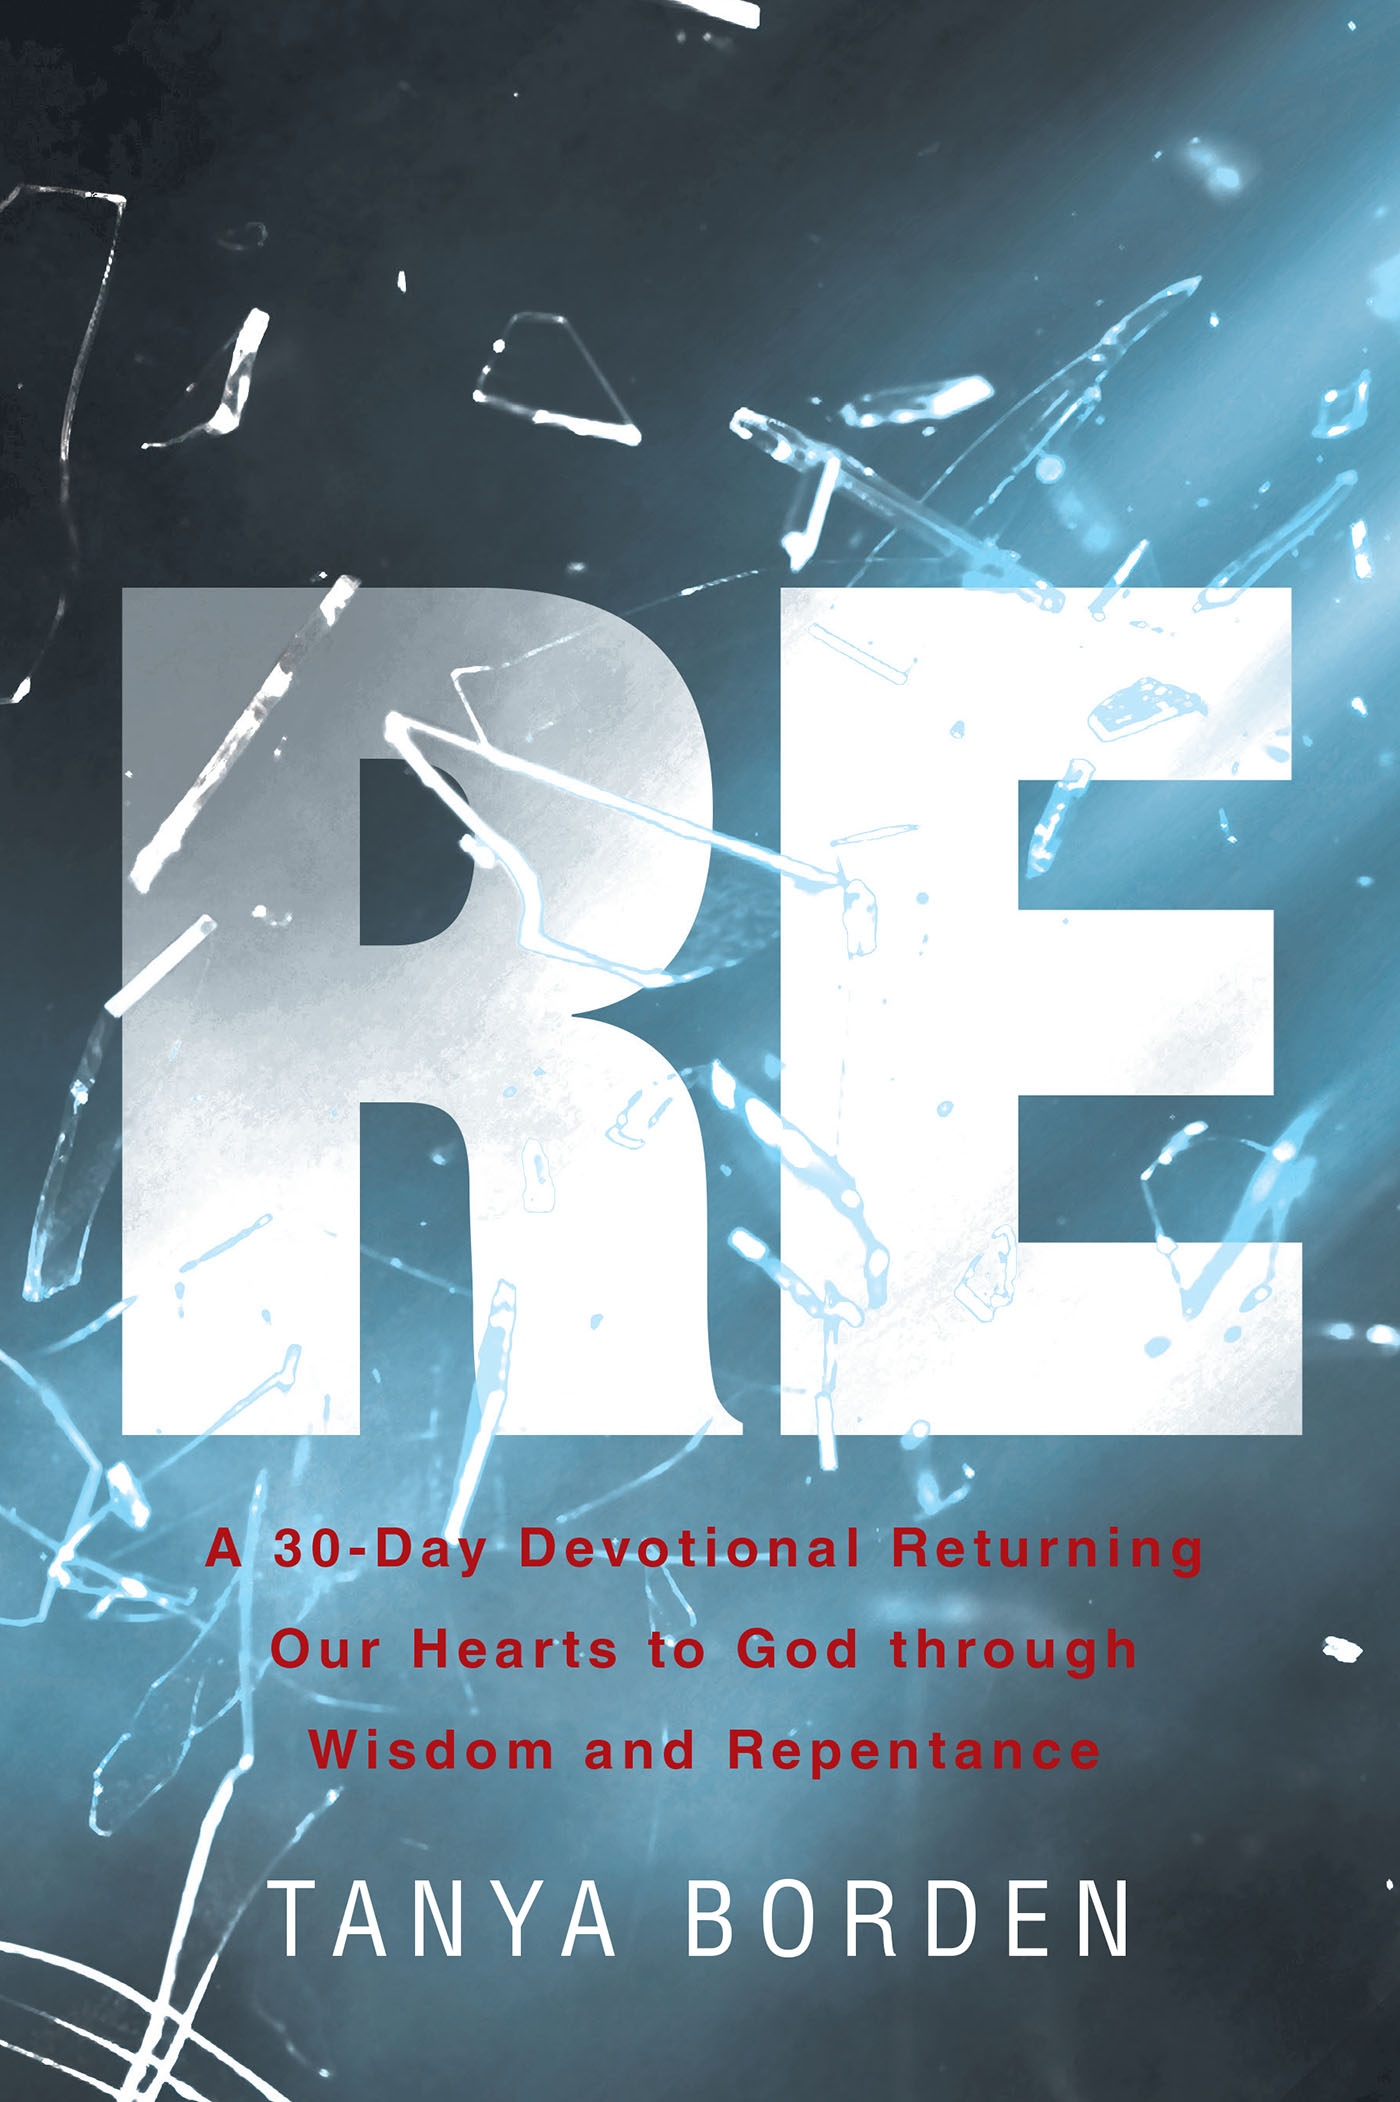 Tanya Borden’s Newly Released “RE: A 30-Day Devotional Returning Our Hearts to God through Wisdom and Repentance” is an Uplifting Resource for Personal Growth